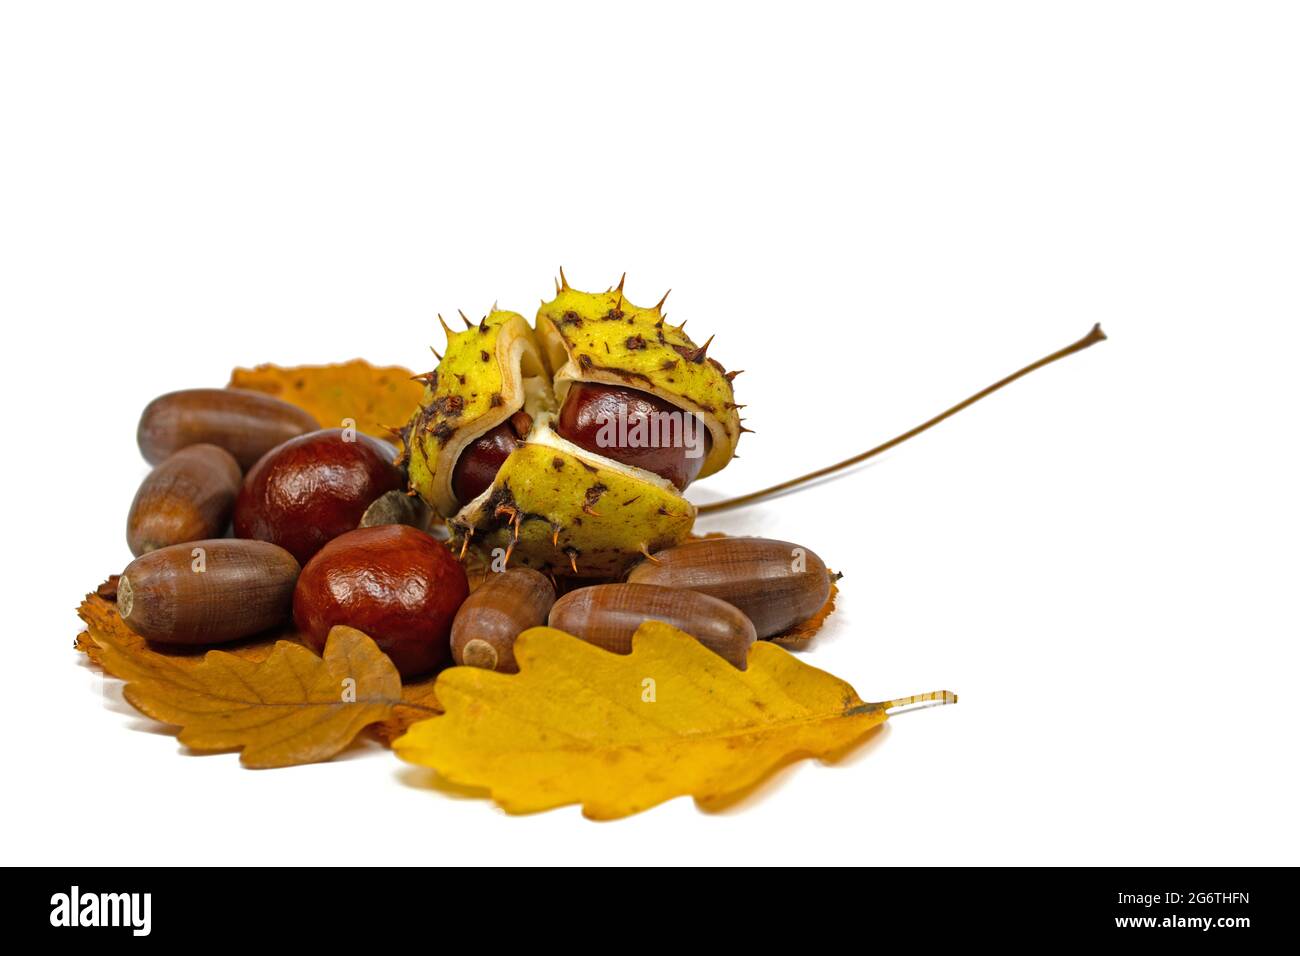 Chestnuts and acorns against a white background Stock Photo